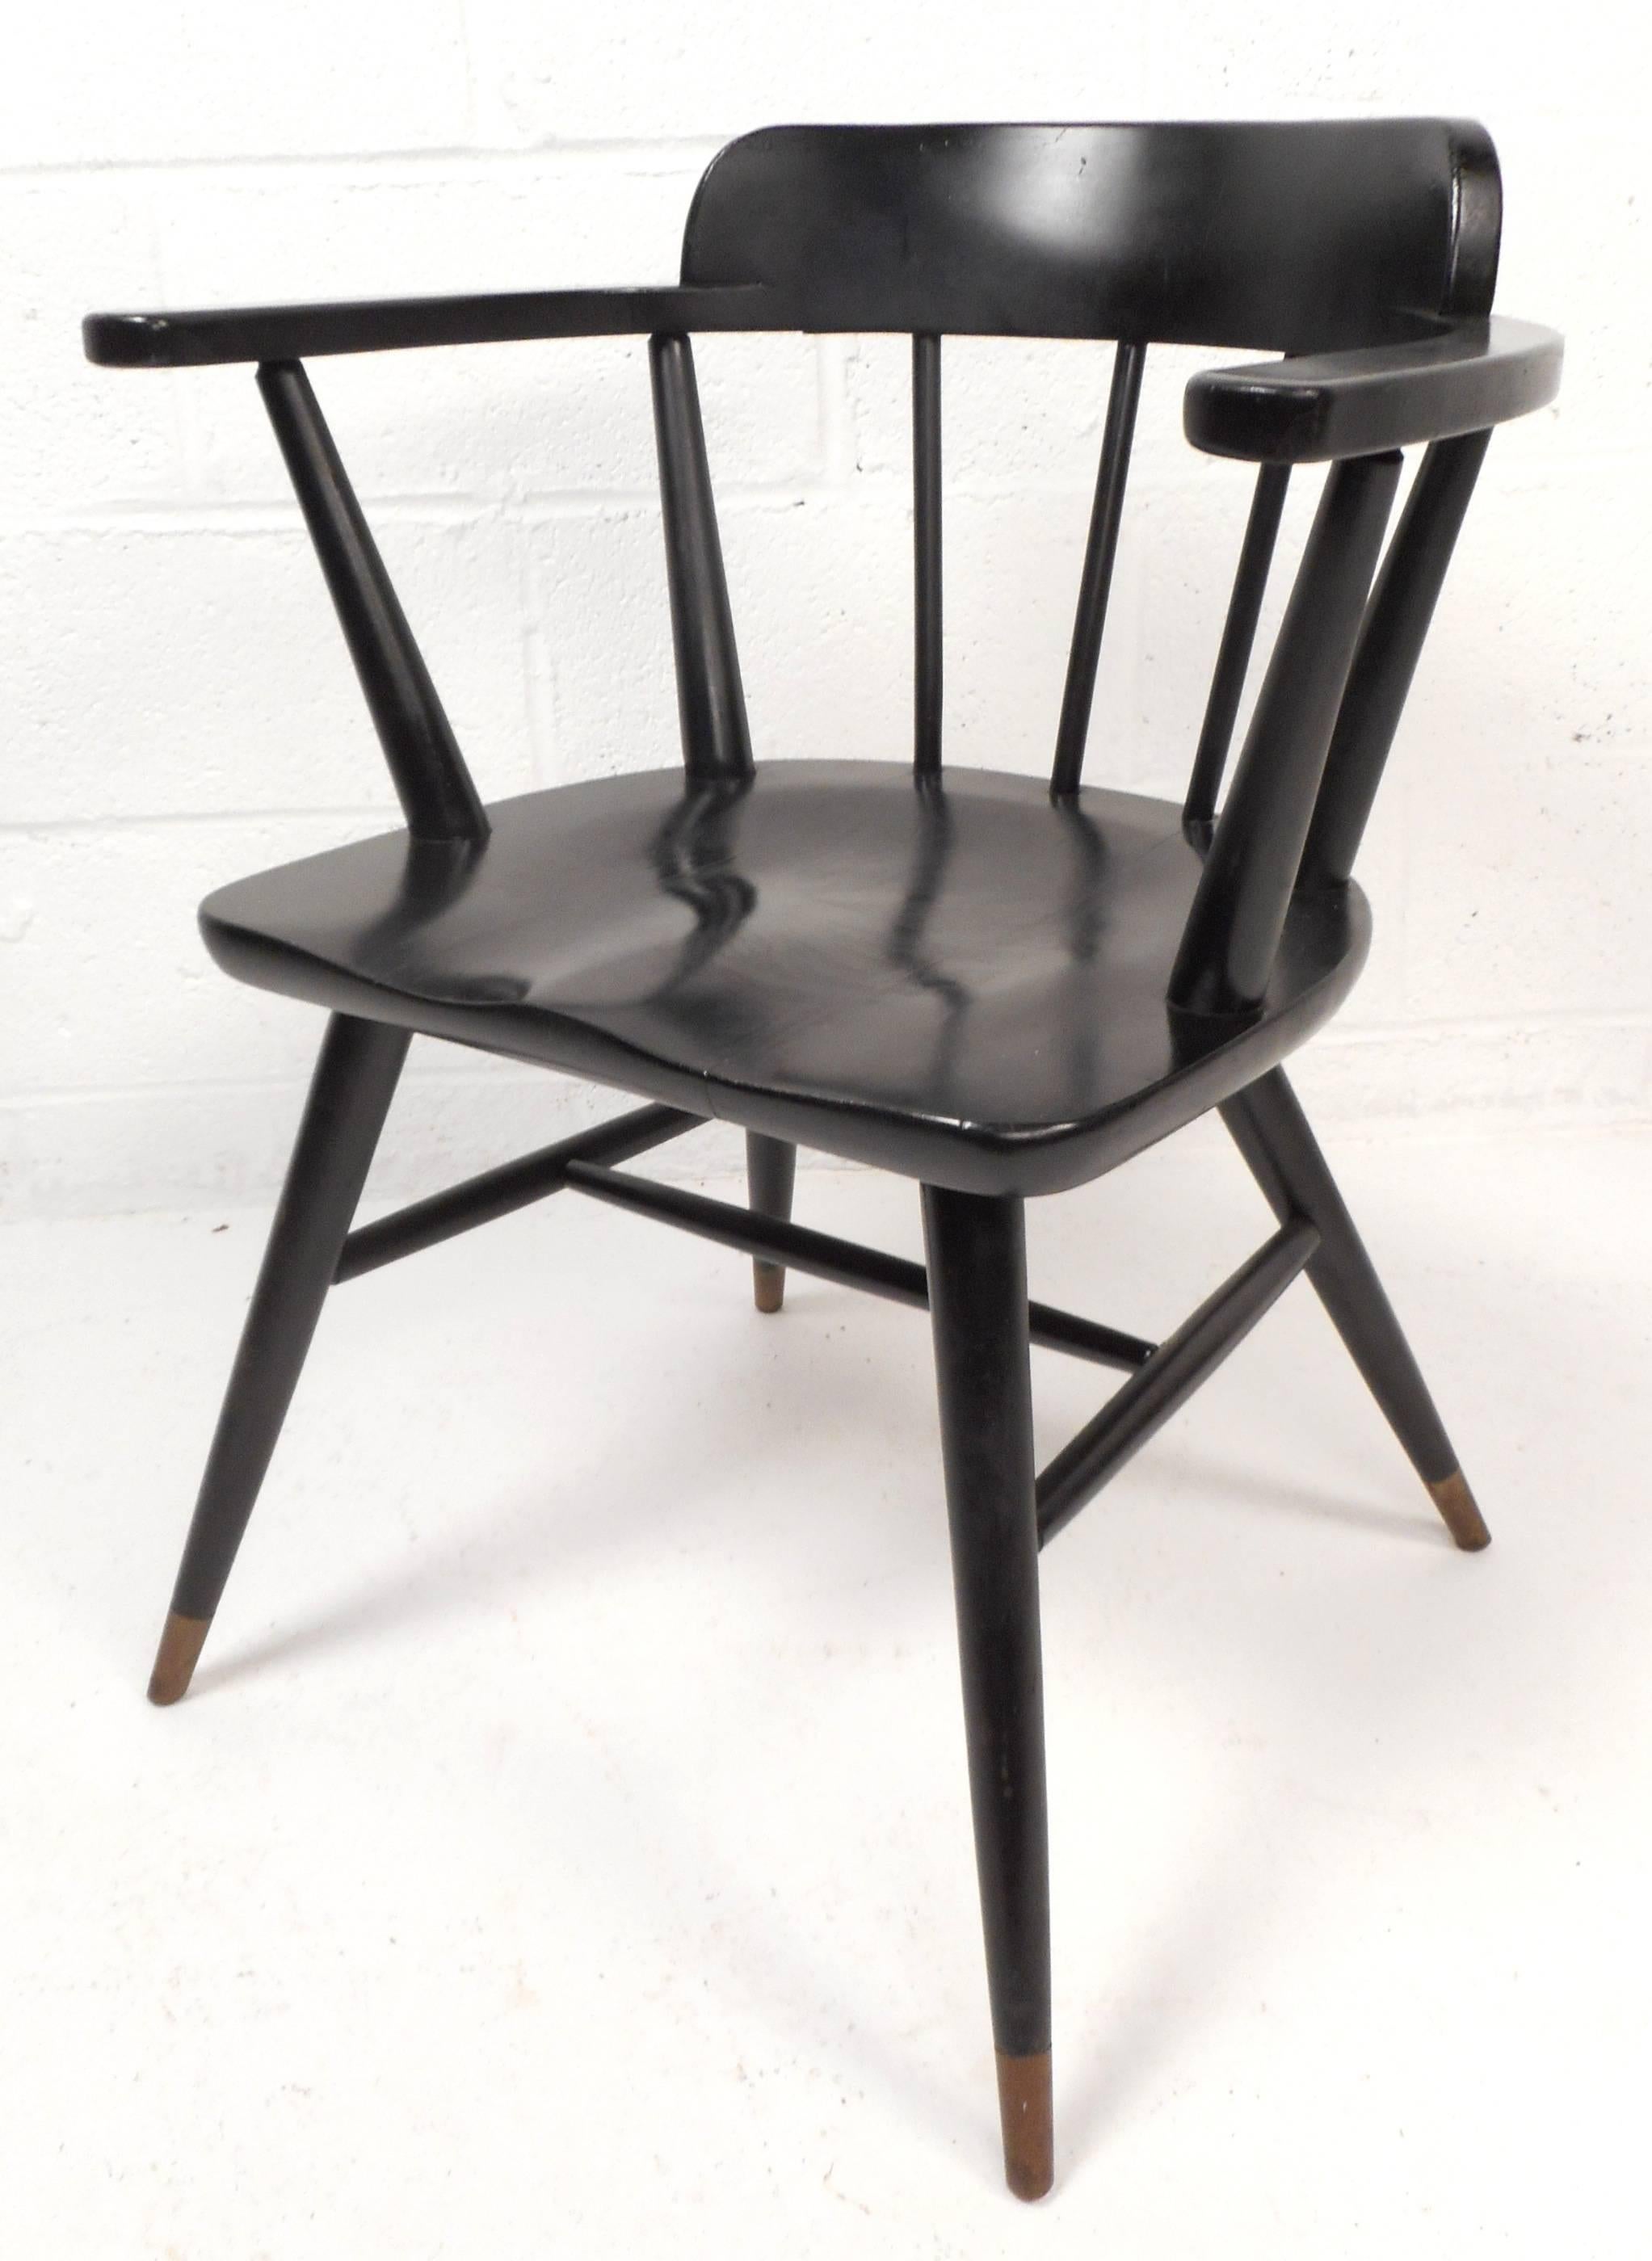 Gorgeous set of four vintage modern dining chairs in the style of designer Paul McCobb. Sleek design features a spindle back with an ebony finish. The unique tapered legs have brass capped feet and the seat is sculpted for optimal comfort. High arm